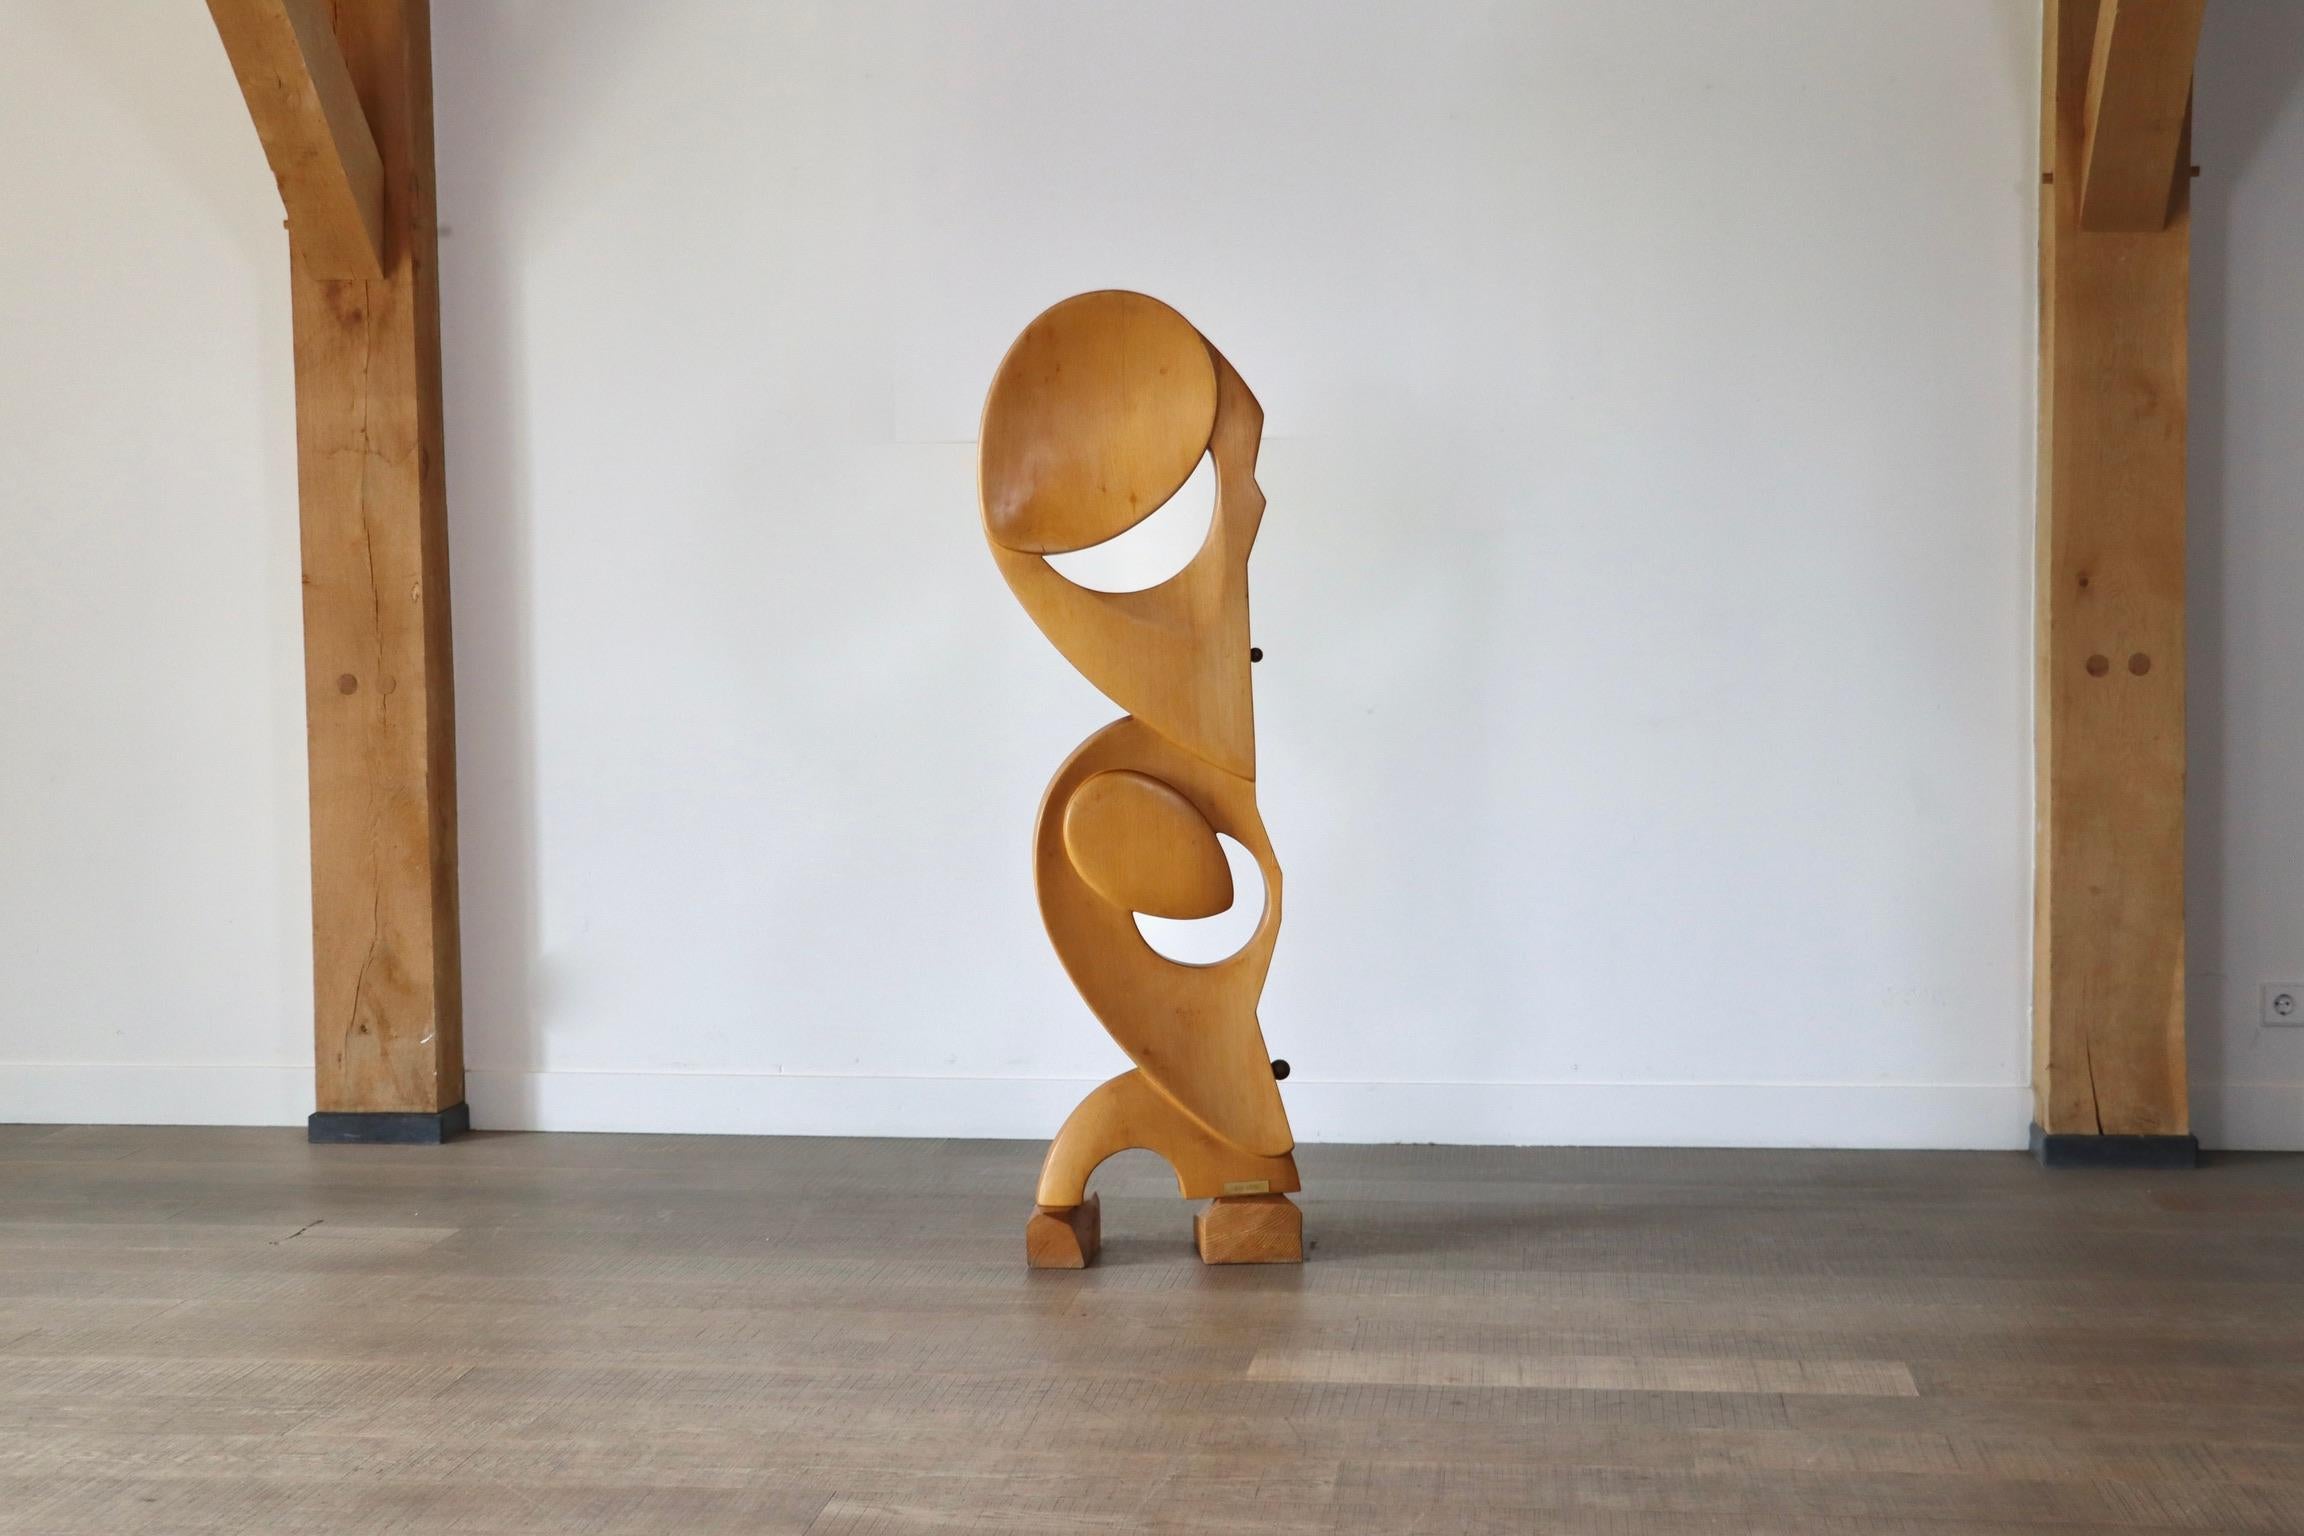 Nice wooden sculpture with brass details carved from Ash wood signed by S. do Lato, Italy 1970s. Its organic shapes are accentuated by two brass round shaped details on the sides, adding an elegant touch to the piece. Crafted from beautiful light